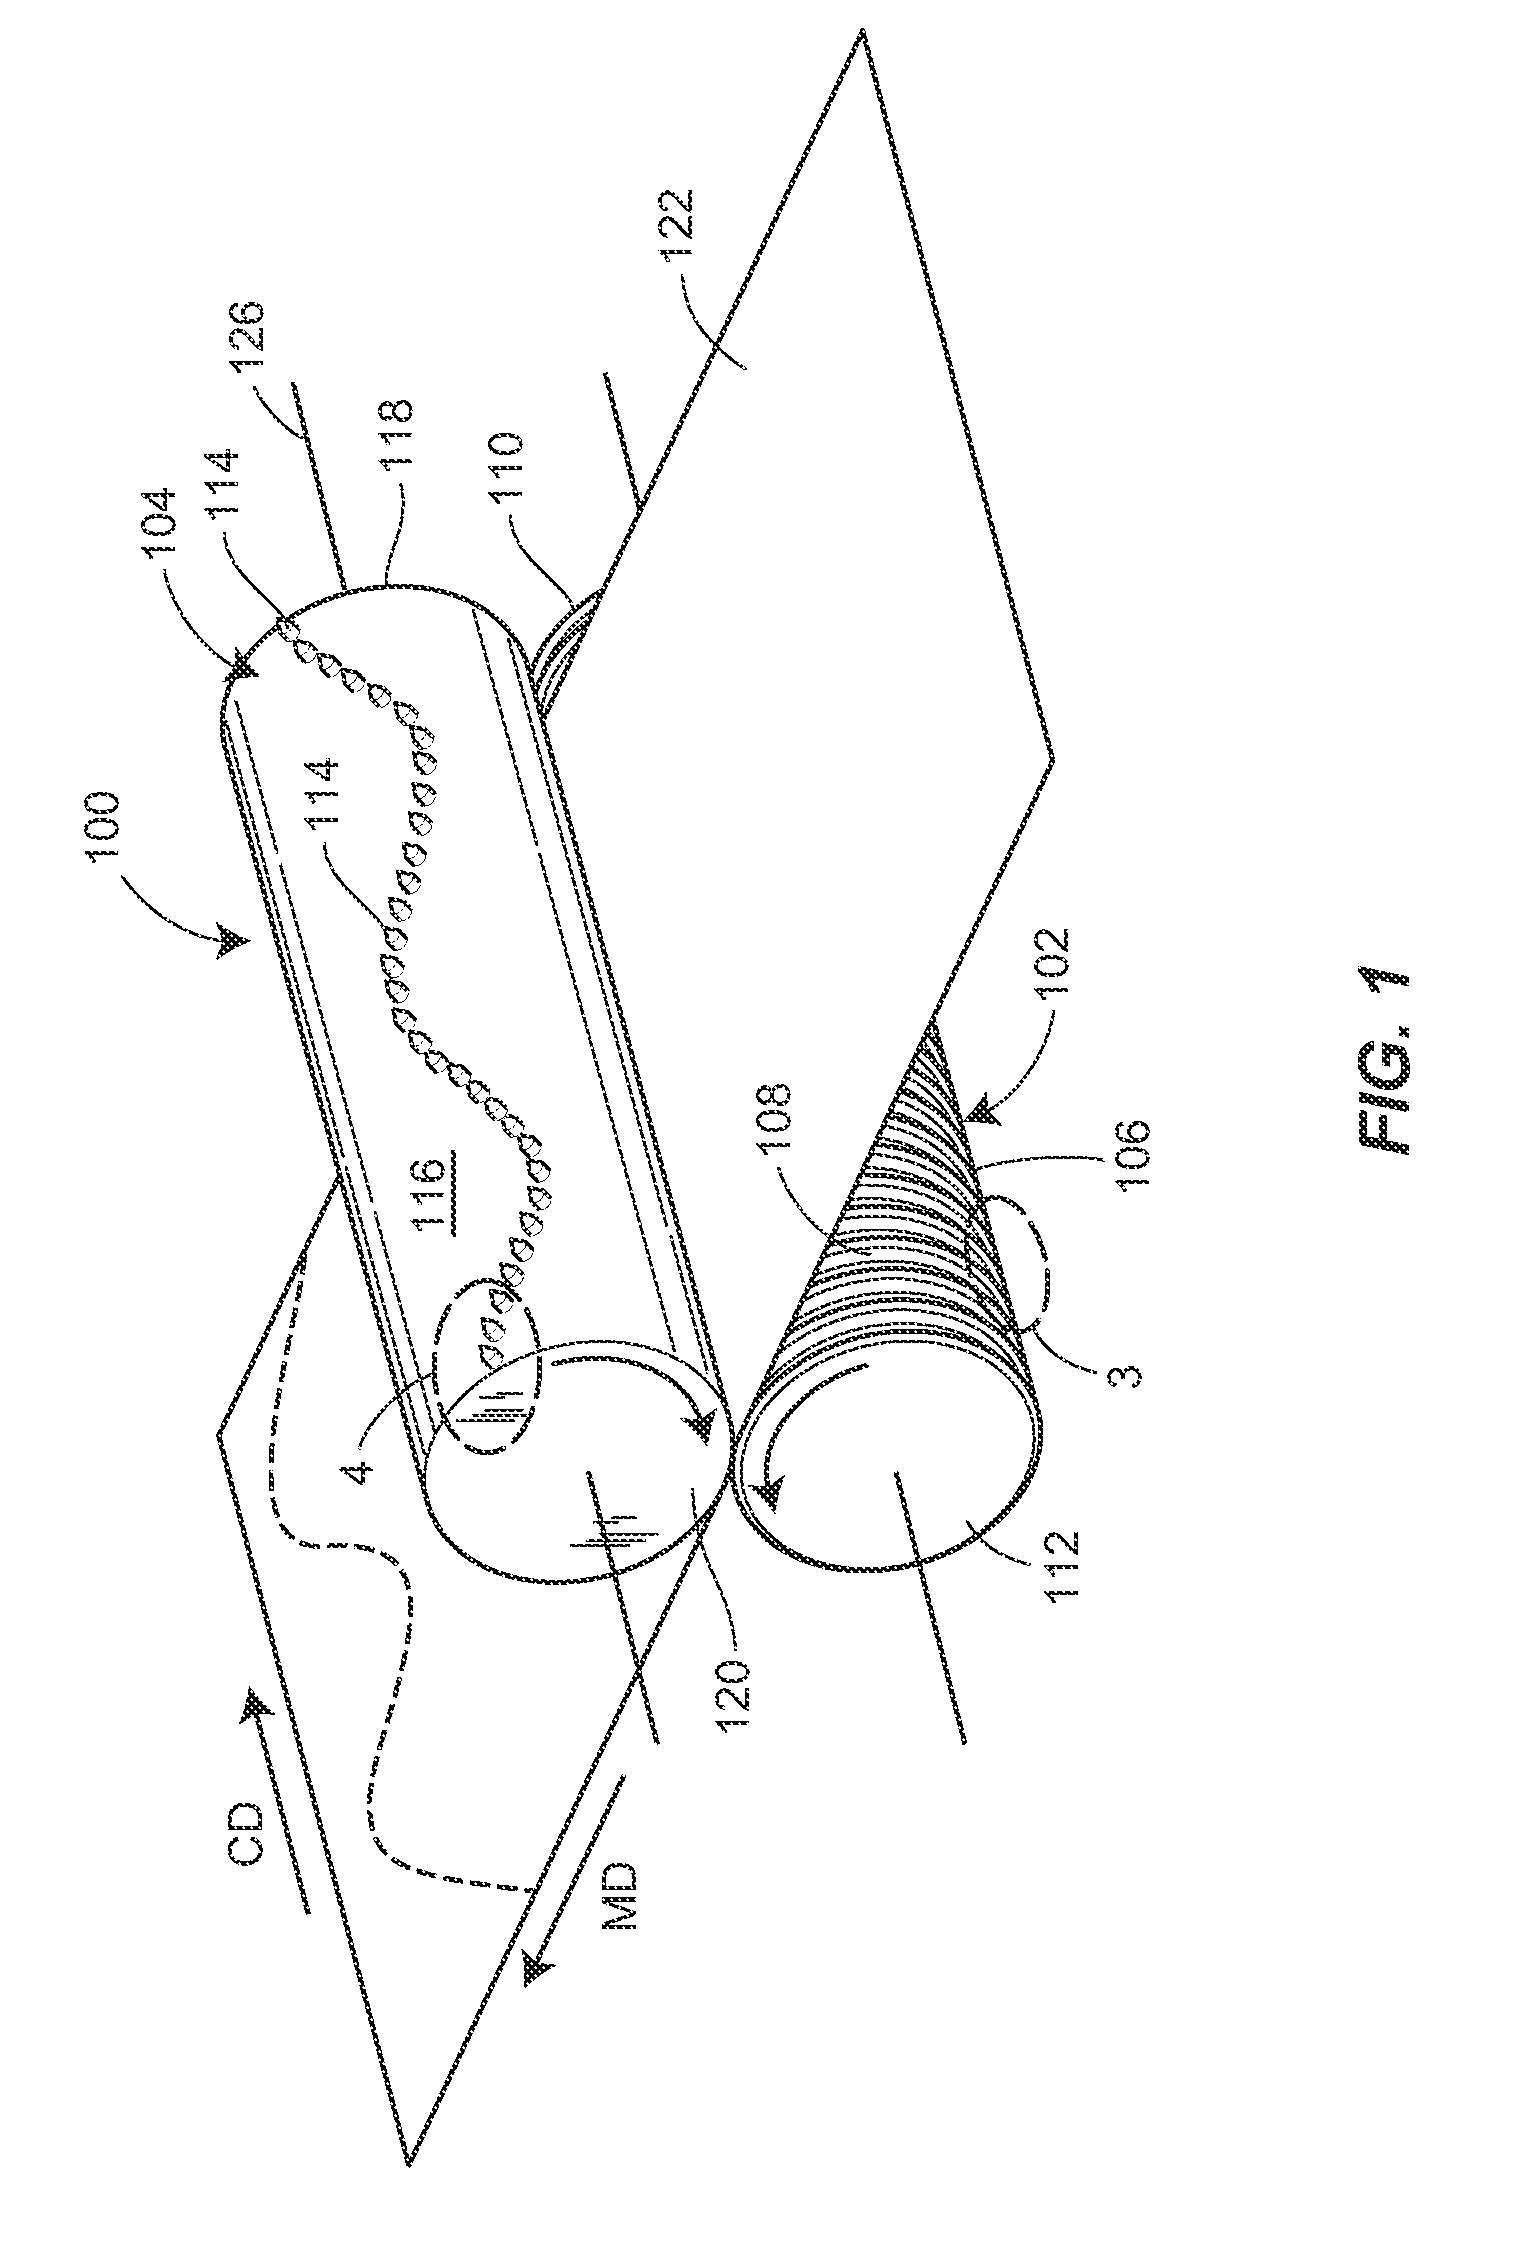 Method for providing a web with unique perforations